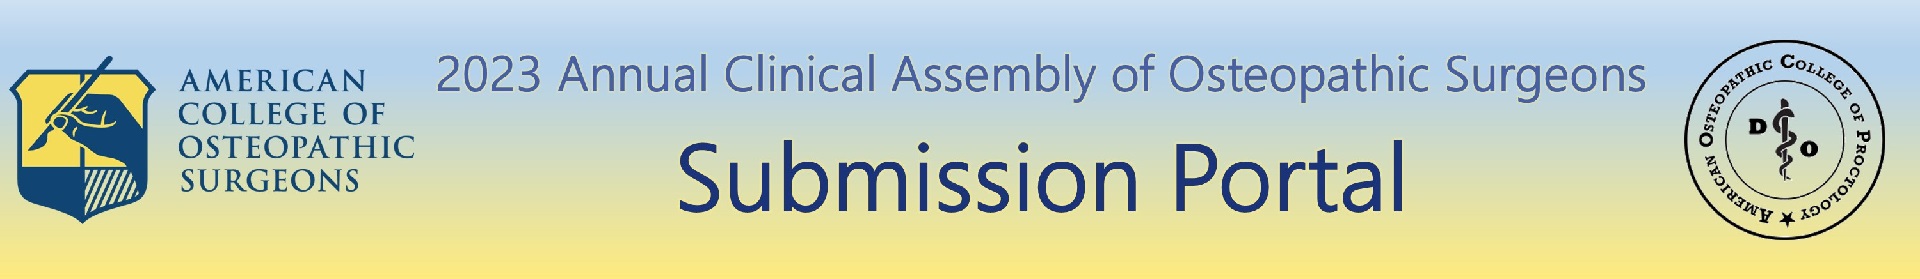 2023 Annual Clinical Assembly of Osteopathic Surgeons (ACA)  Event Banner